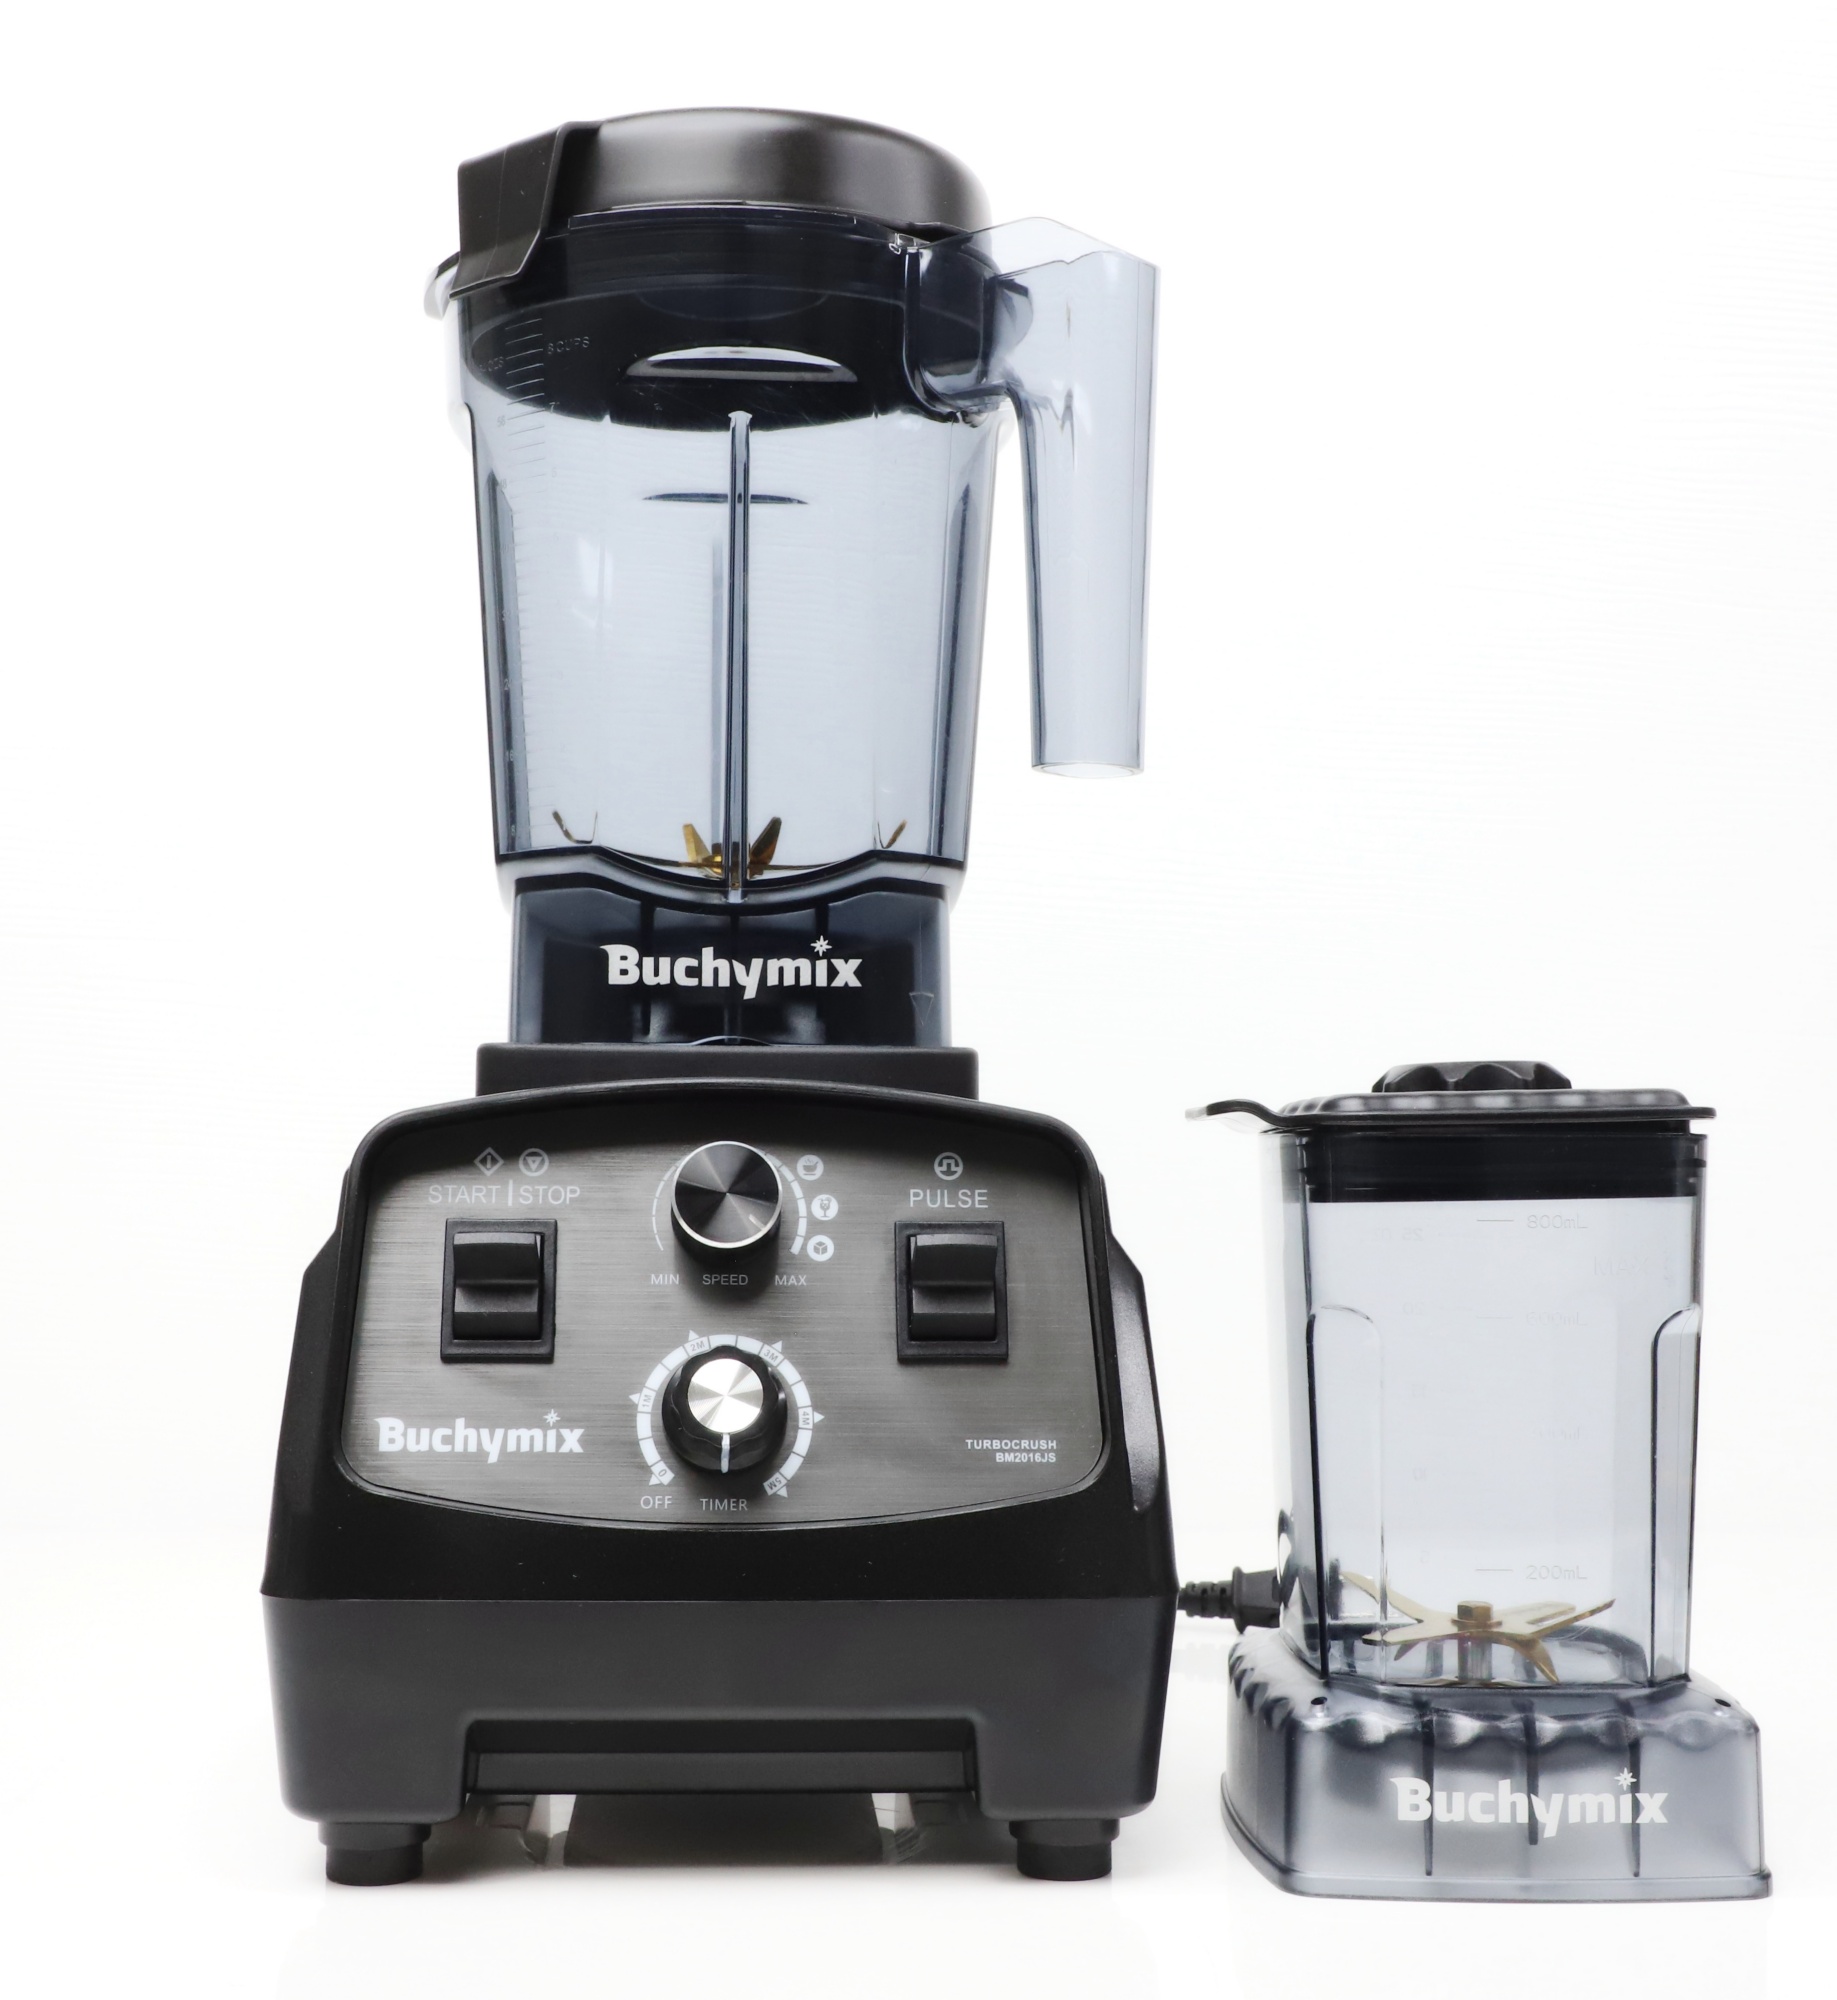 Go on www.Buchymixafrica.com to save on this blender #eastersales